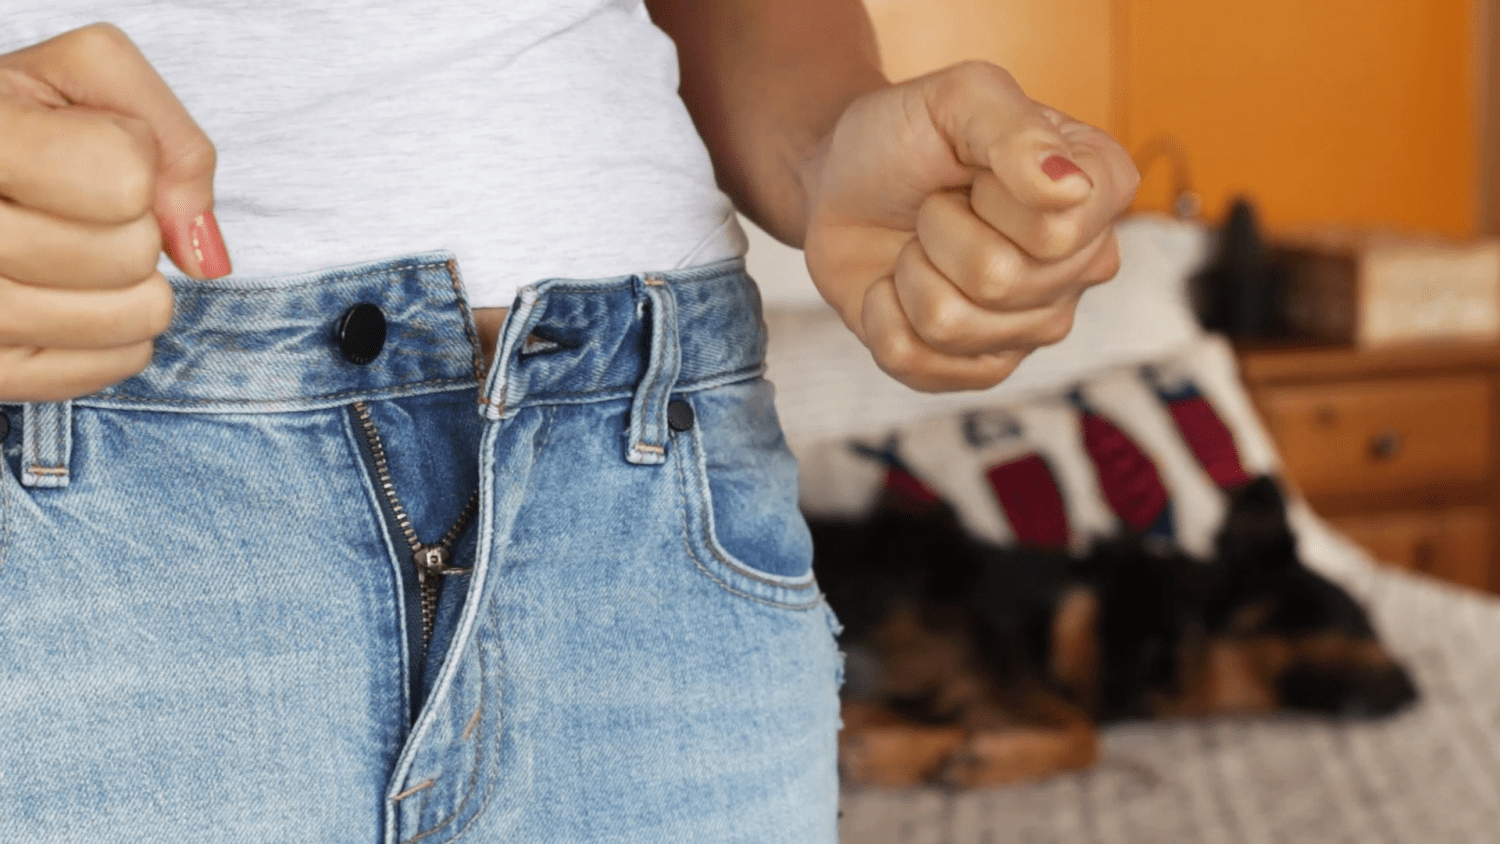 violin Gentagen Almægtig The 1 trick you need to stretch jeans that shrunk in the dryer